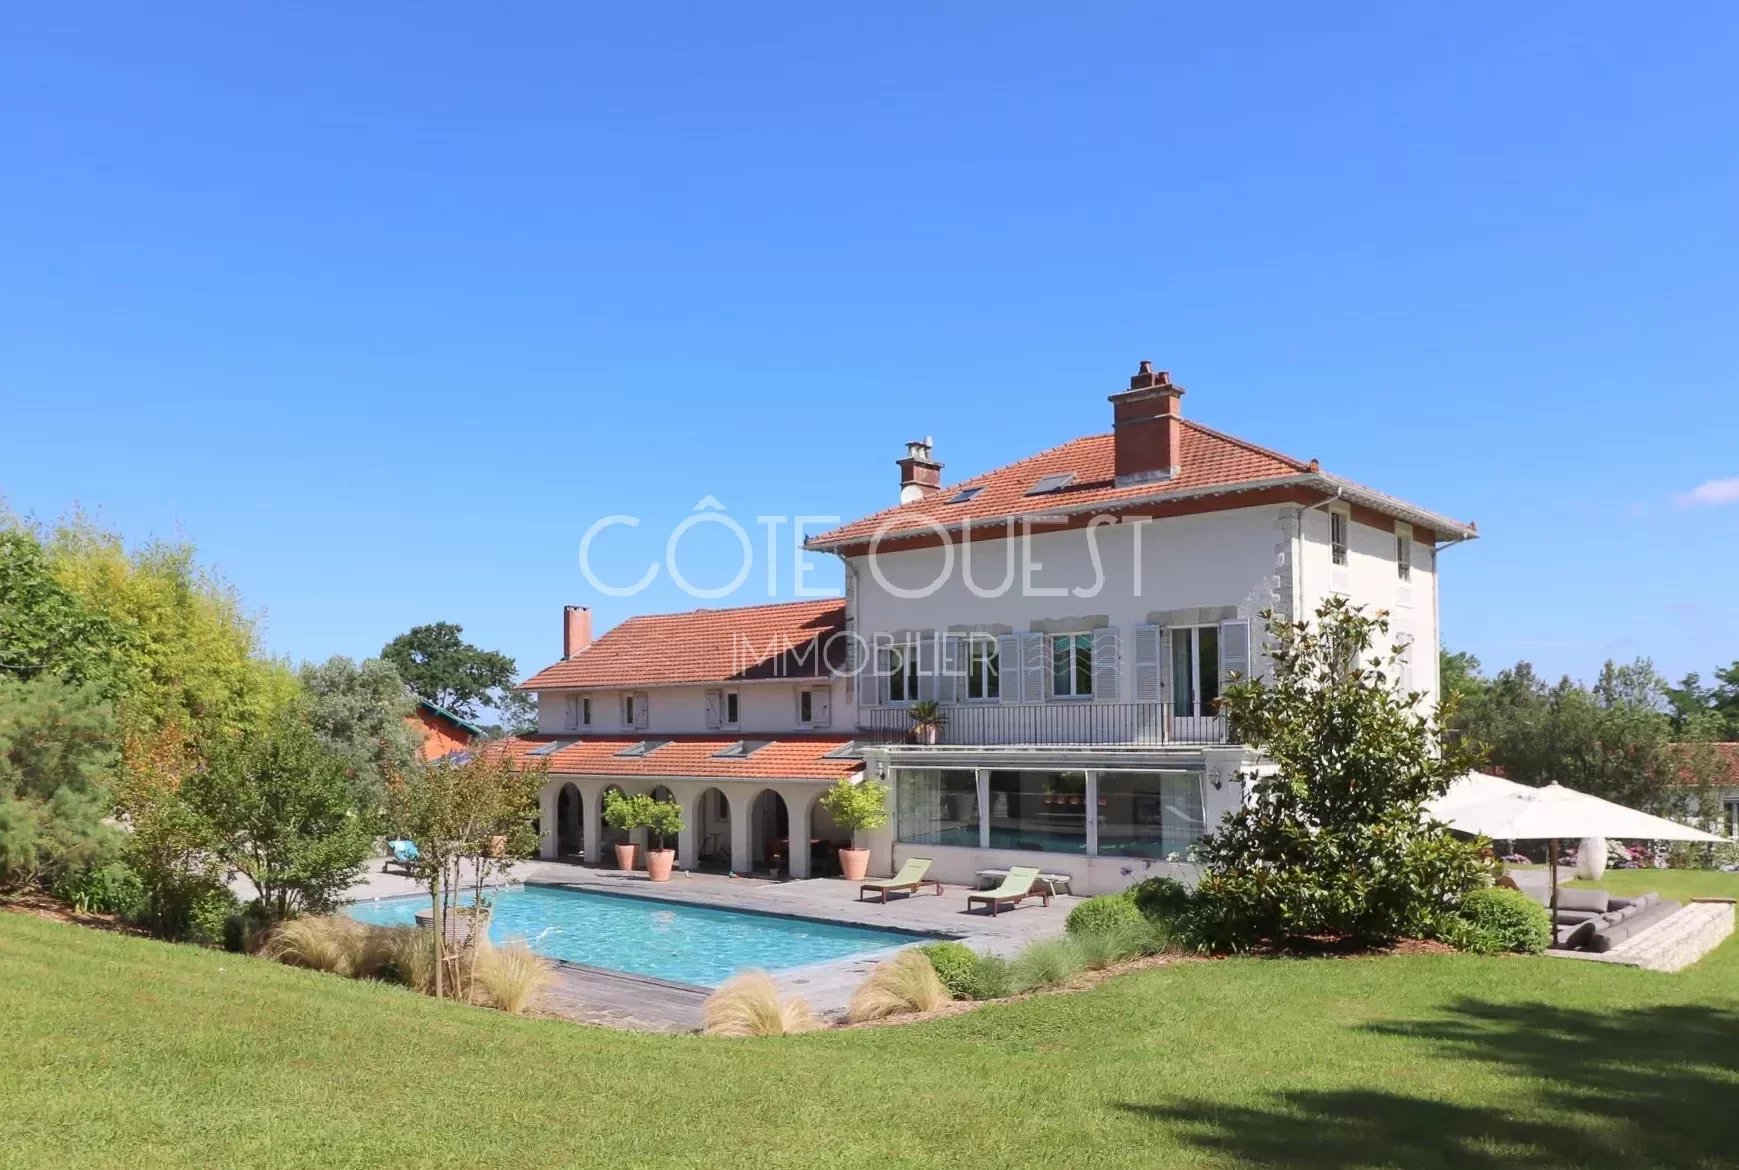 A SUPERB PERIOD PROPERTY ON THE EDGE OF BIARRITZ